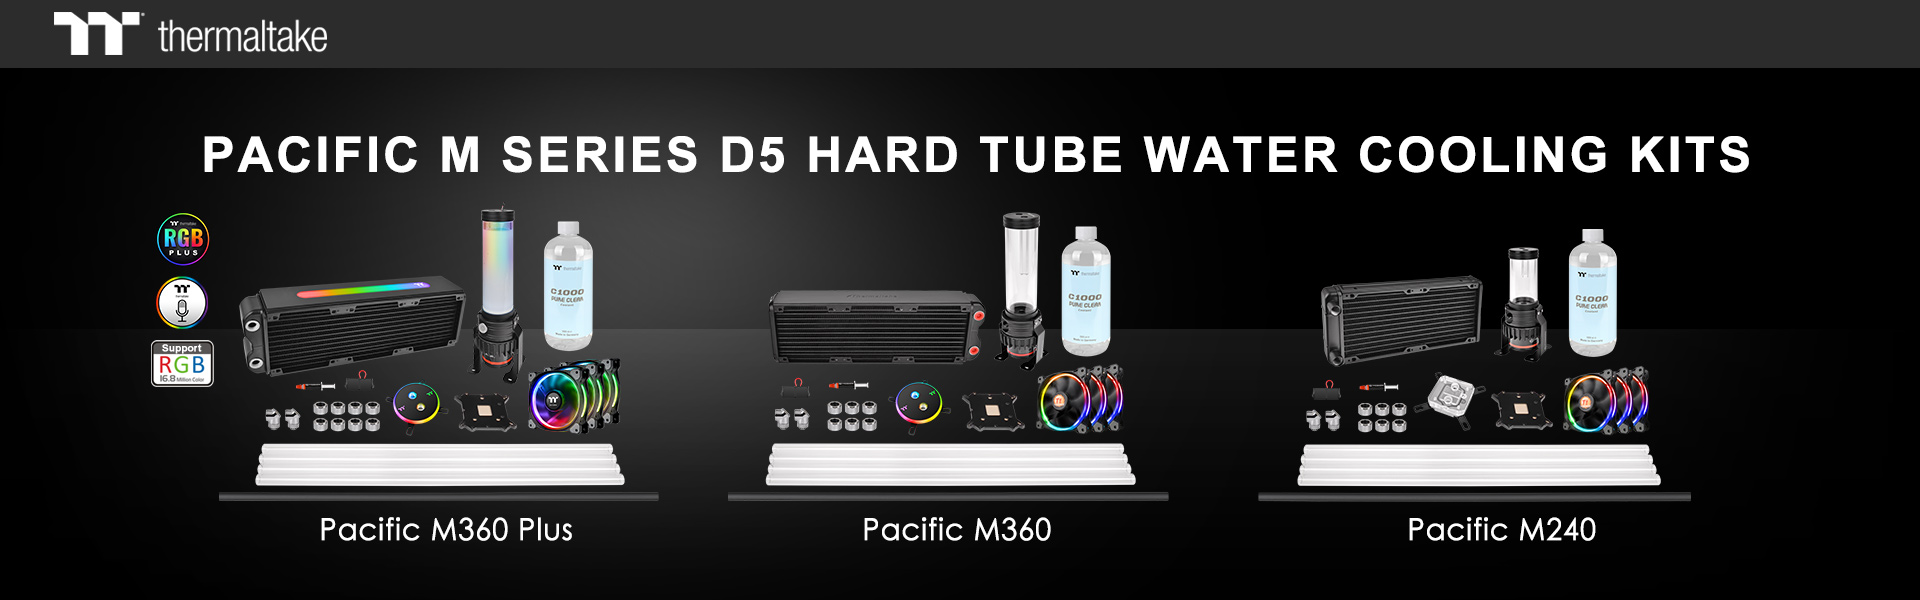 Thermaltake Releases the Latest Pacific M Series D5 Hard Tube Water Cooling Kits at COMPUTEX Taipei 2018